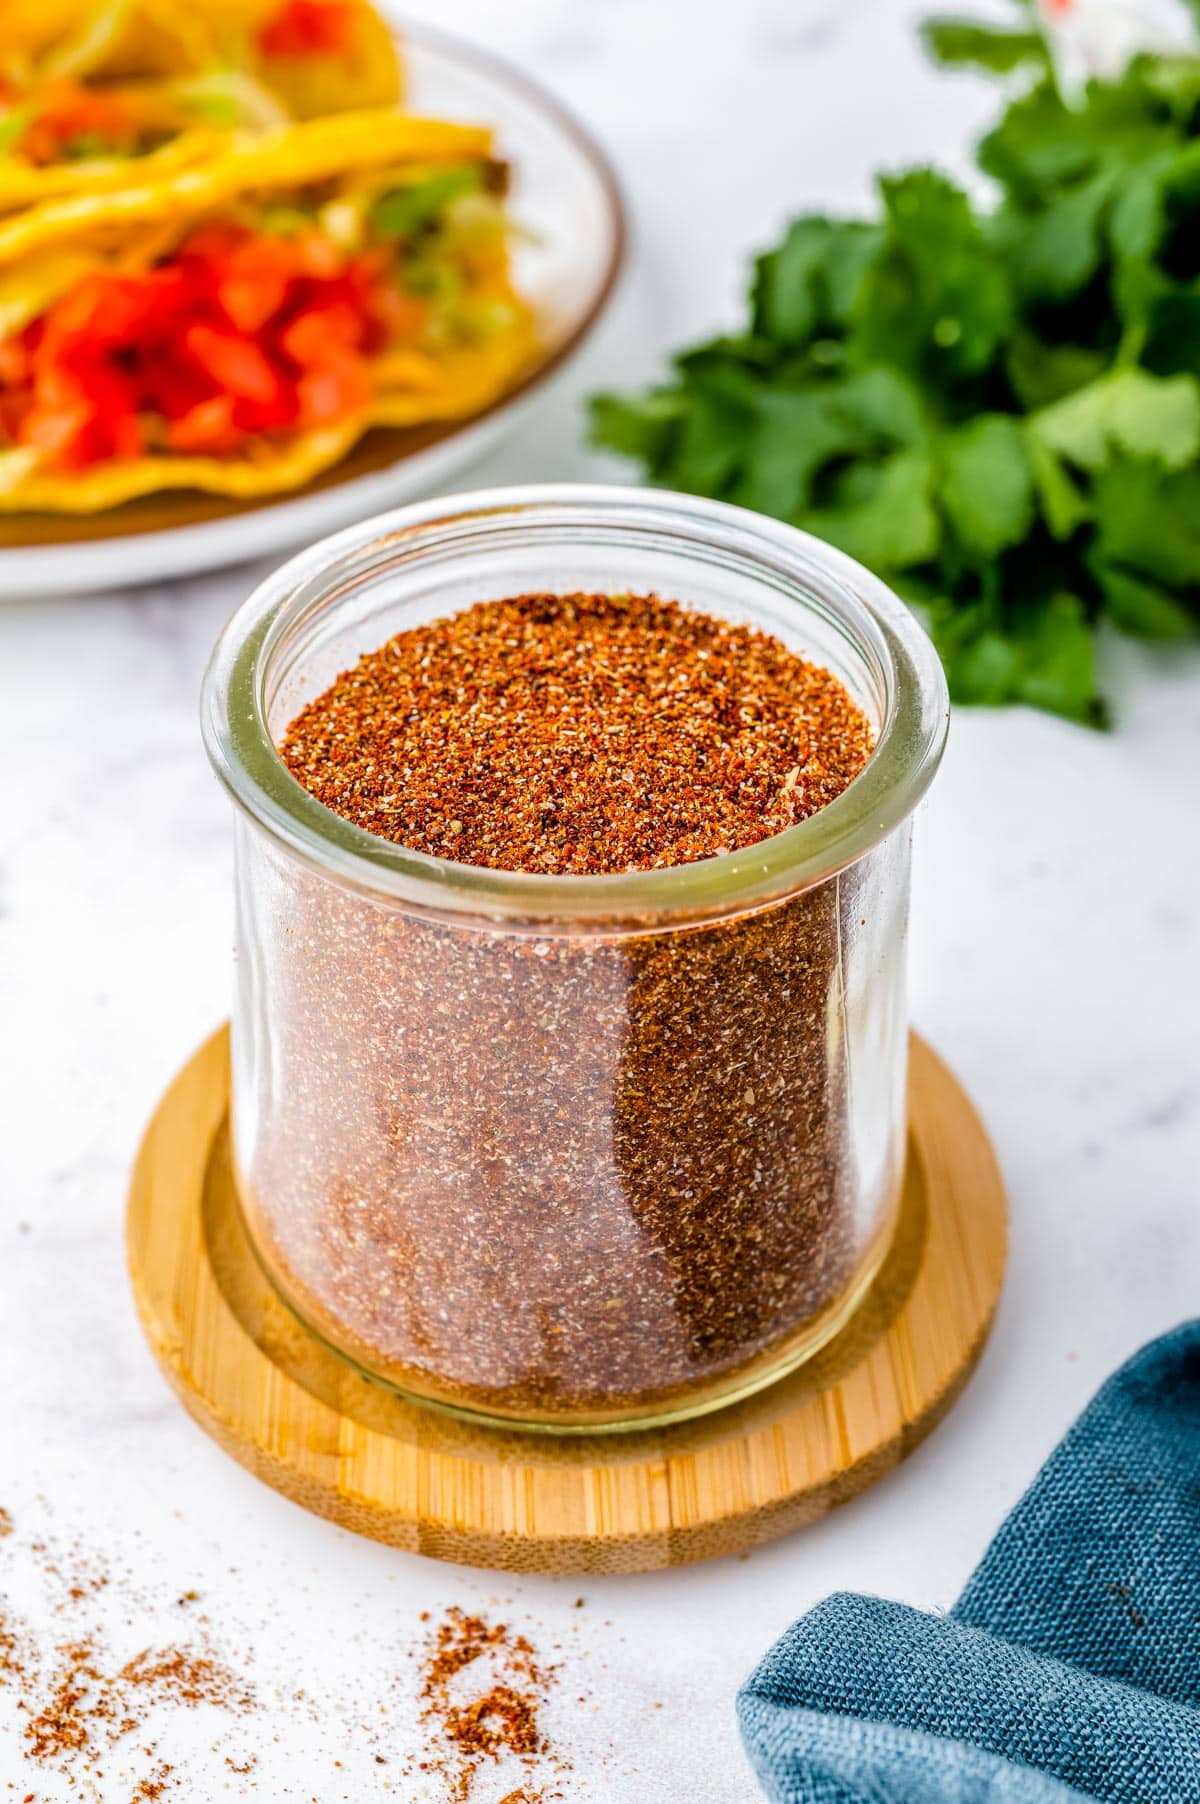 Homemade Taco Seasoning in a glass jar with tacos in the background.